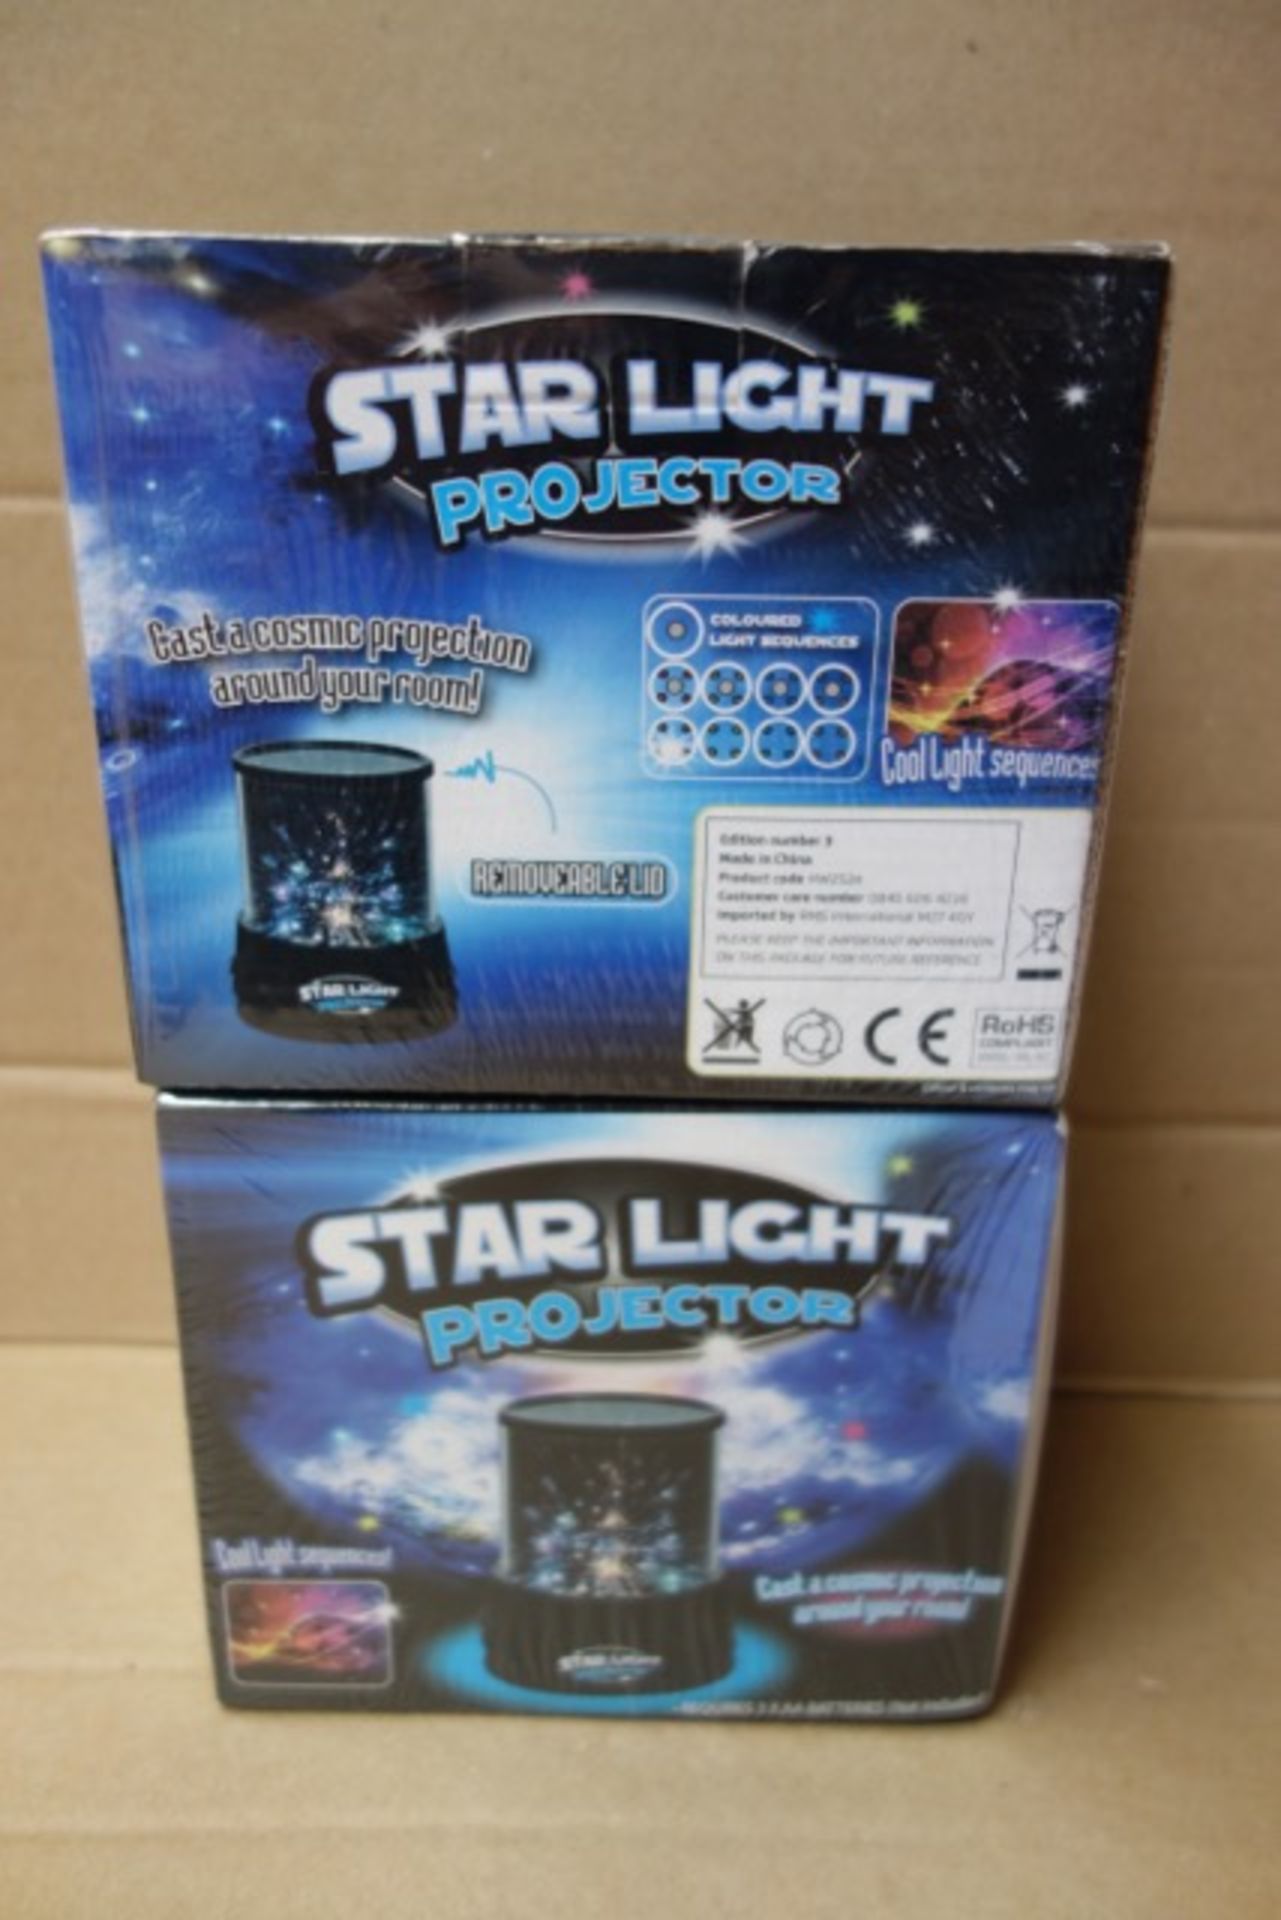 36 x Starlight Projectors. Cast a cosmic projection around your room. Cool light sequences. - Image 2 of 3